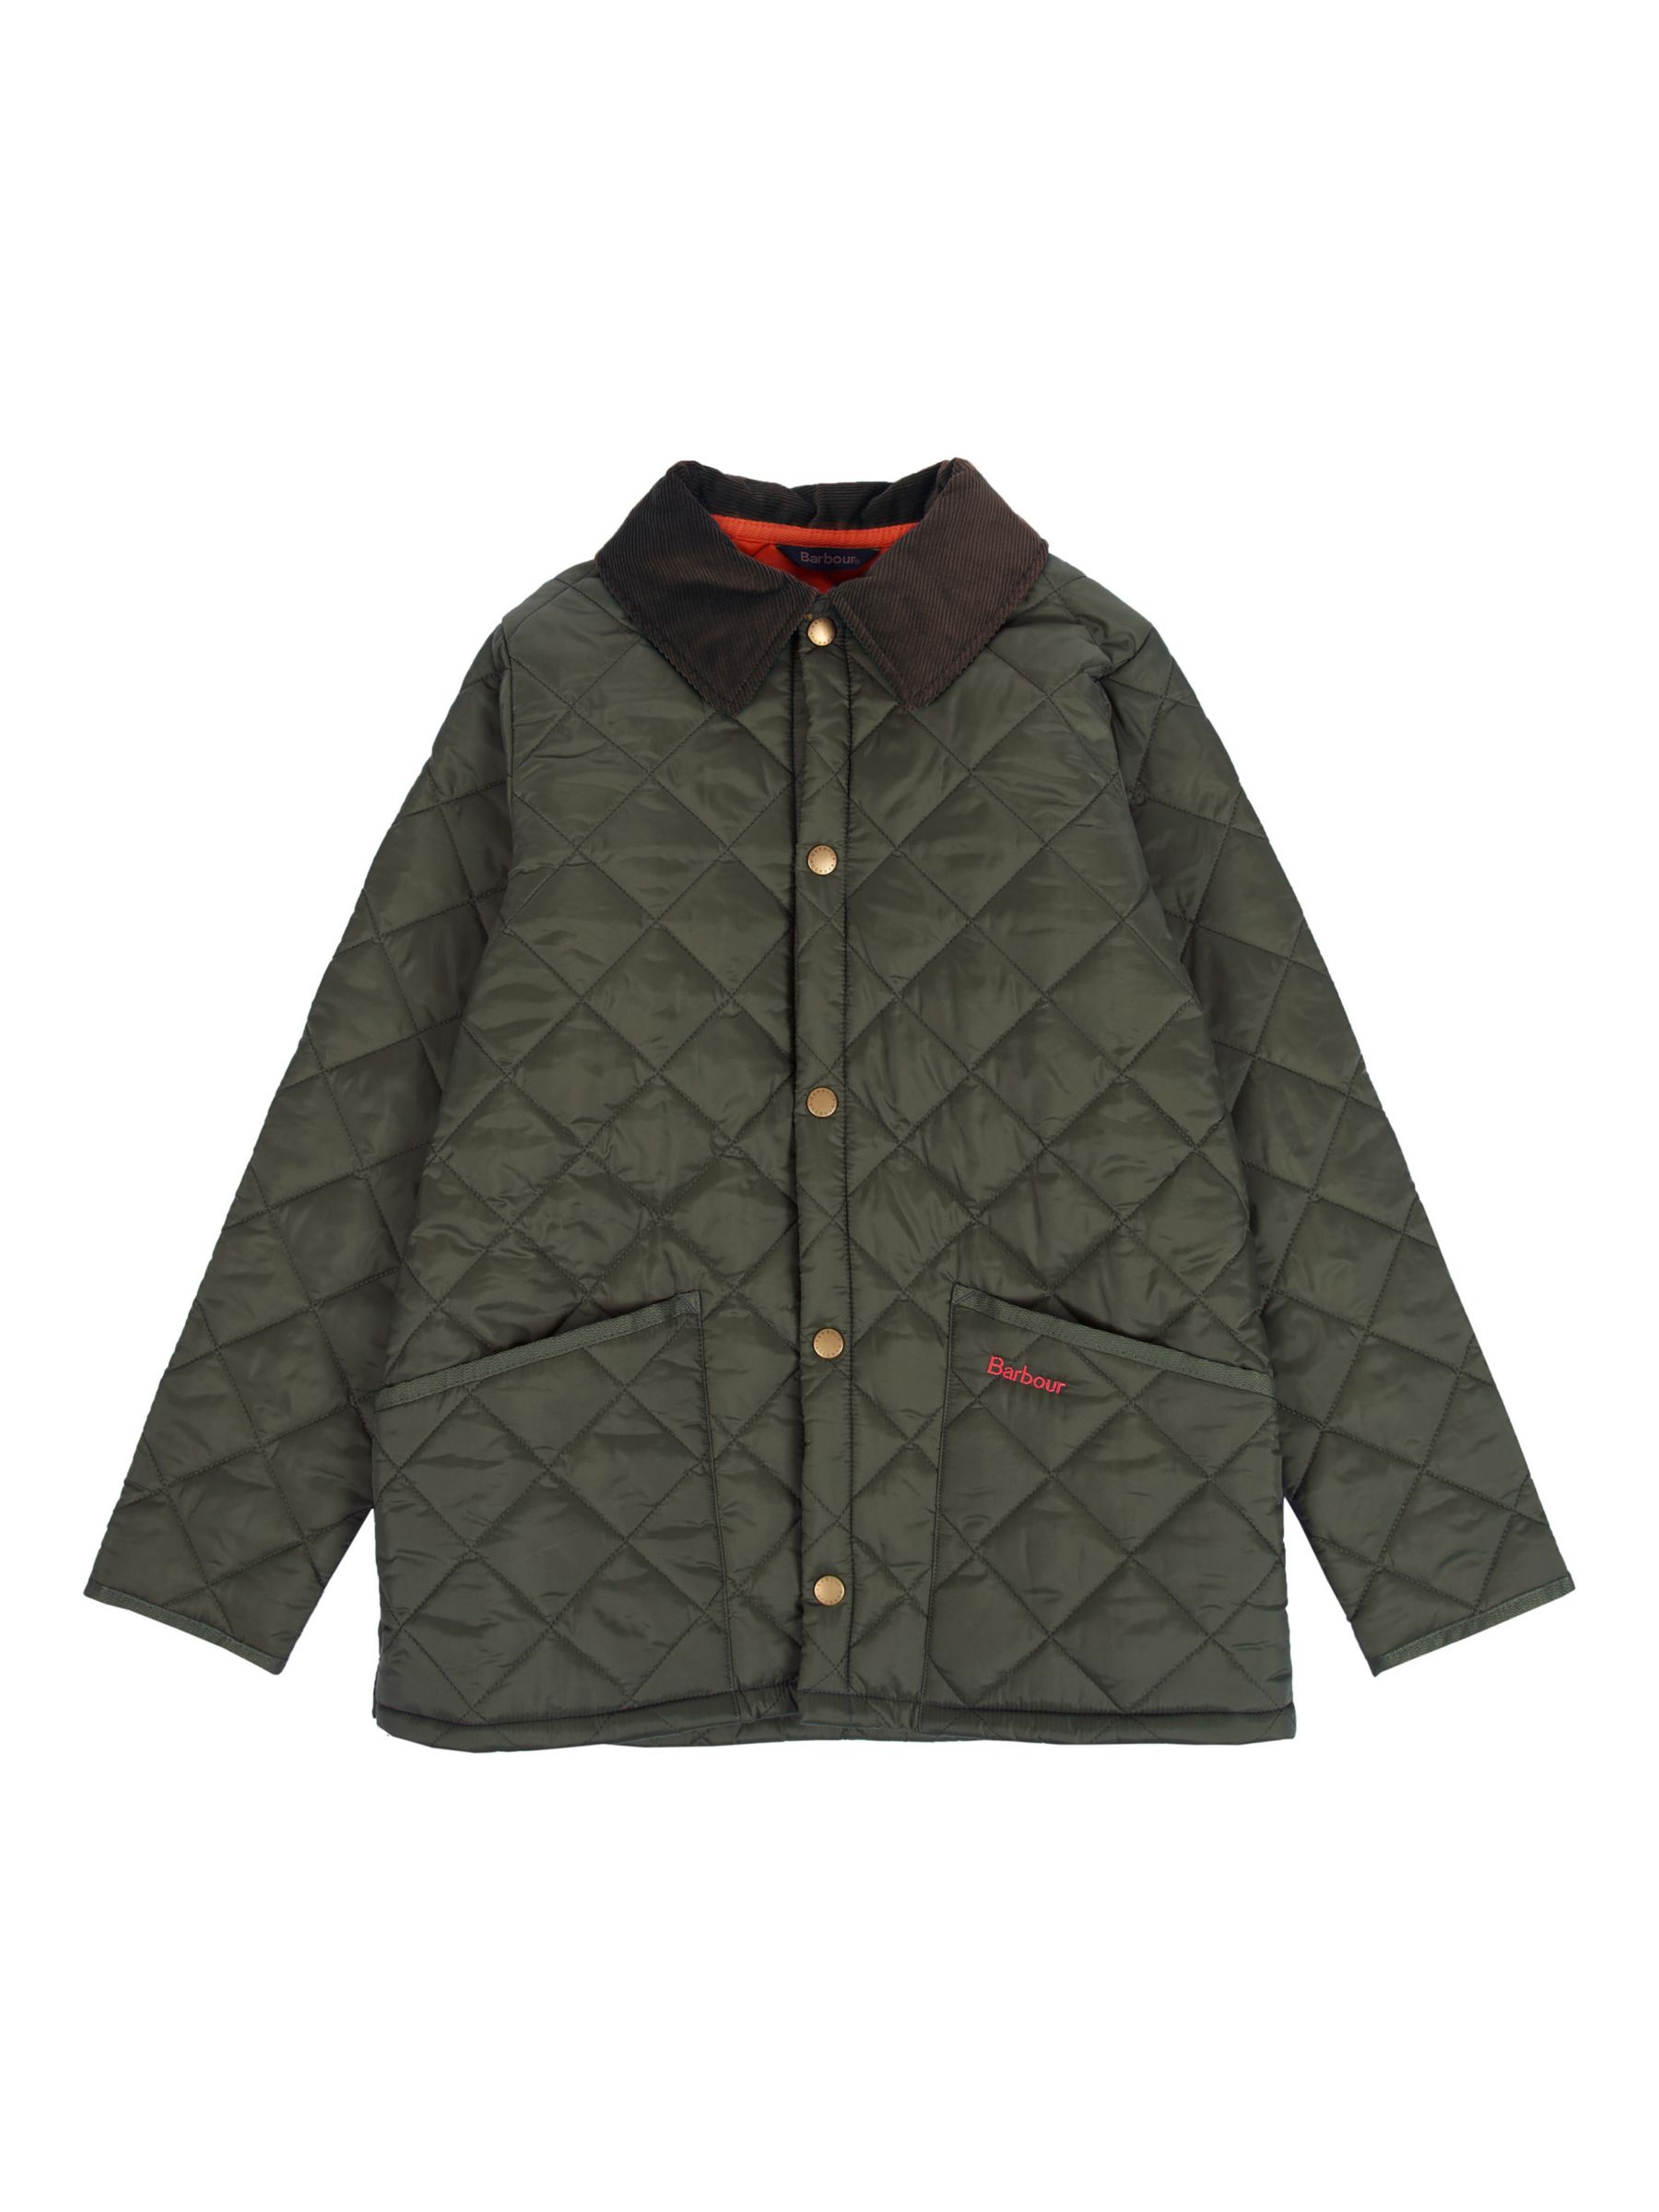 Barbour Liddesdale Quilted Jacket, Olive, S